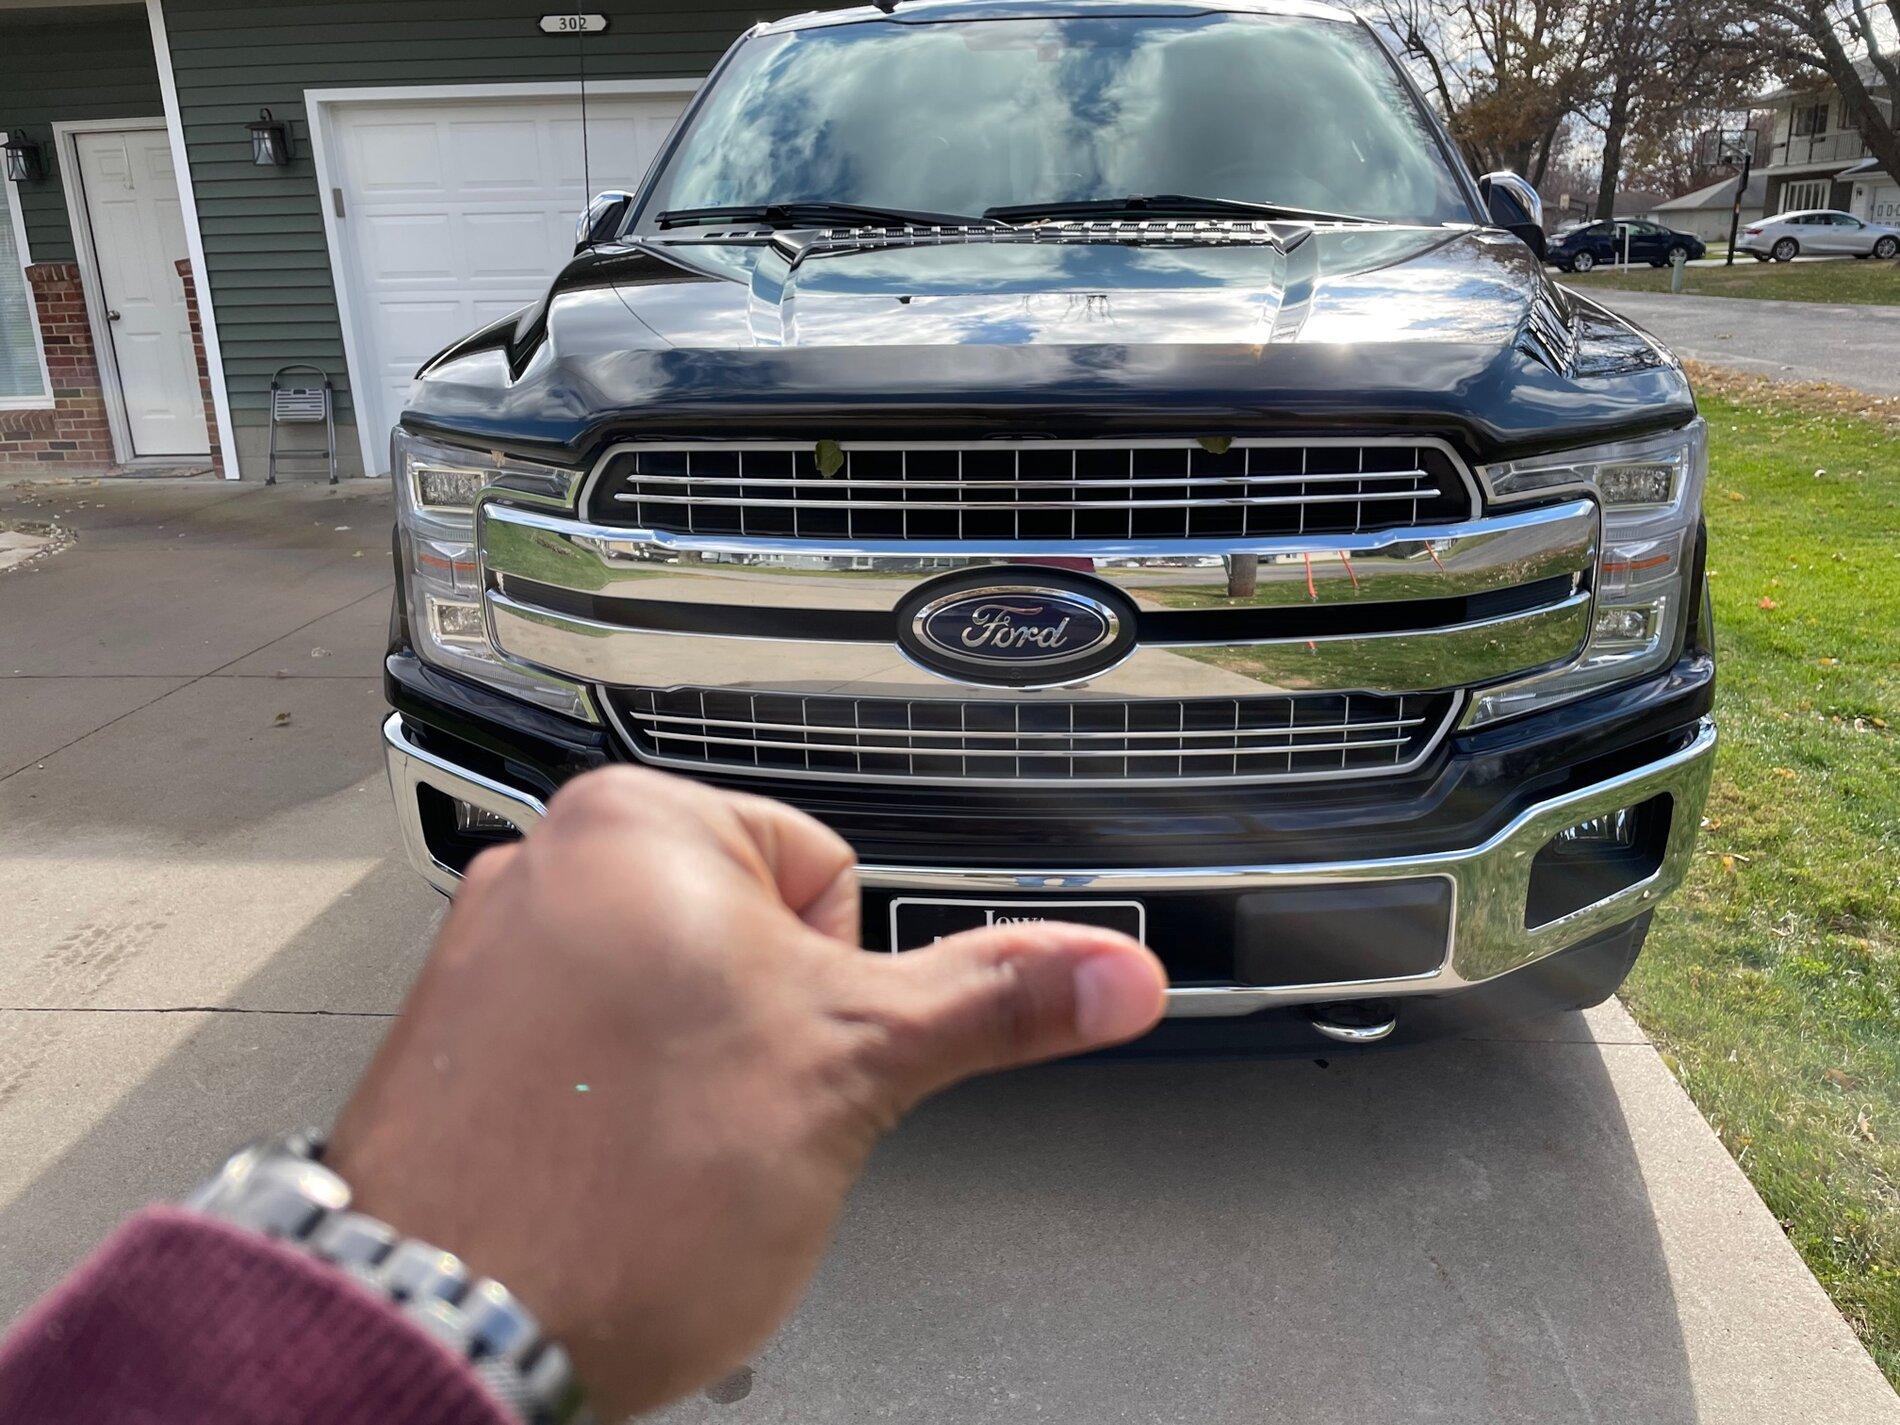 Ford F-150 Lightning 2019 F-150 Lariat for Sale IMG_0018 (1)